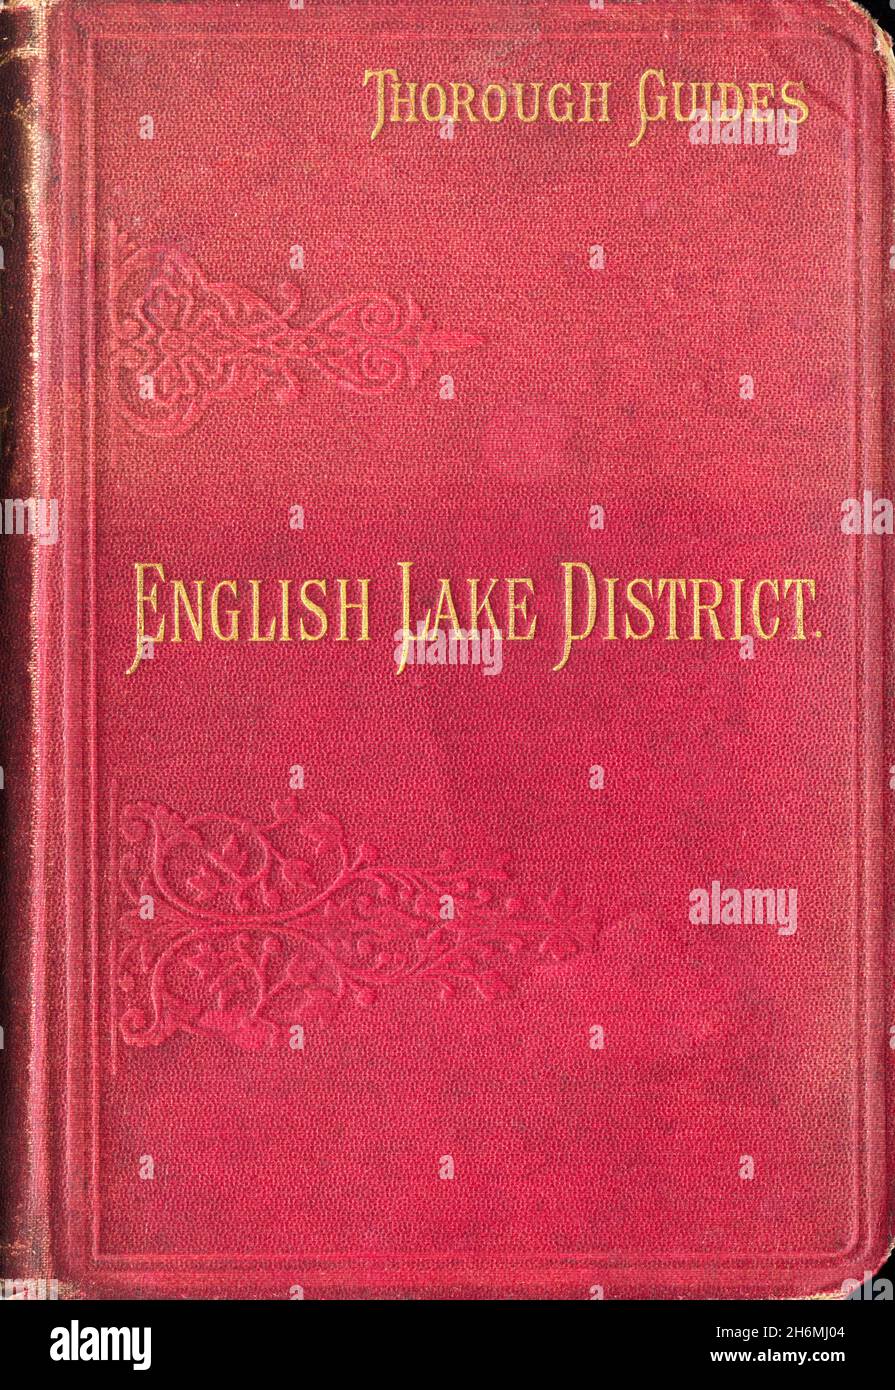 Front cover of a Baddeley's Thorough Guide to the English Lake District, published in 1889 Stock Photo